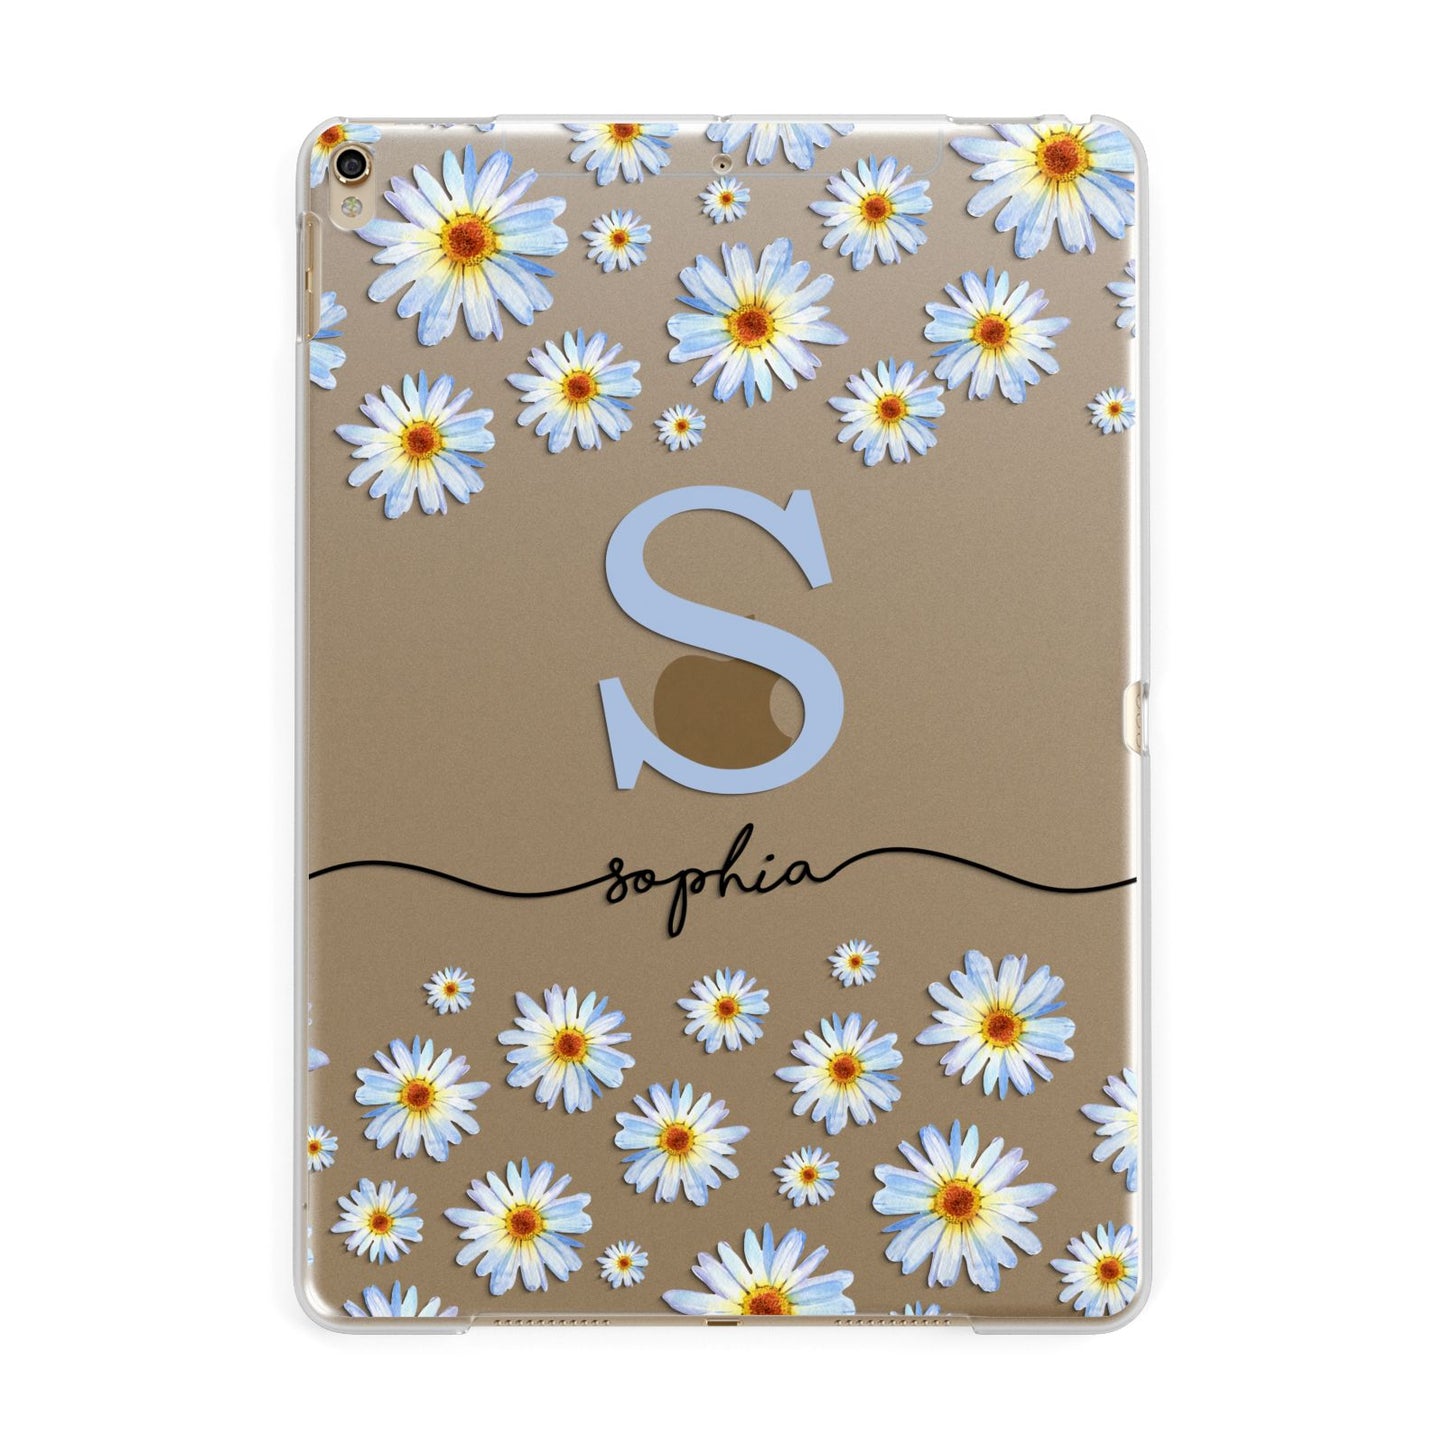 Personalised Daisy Initial Name Apple iPad Gold Case